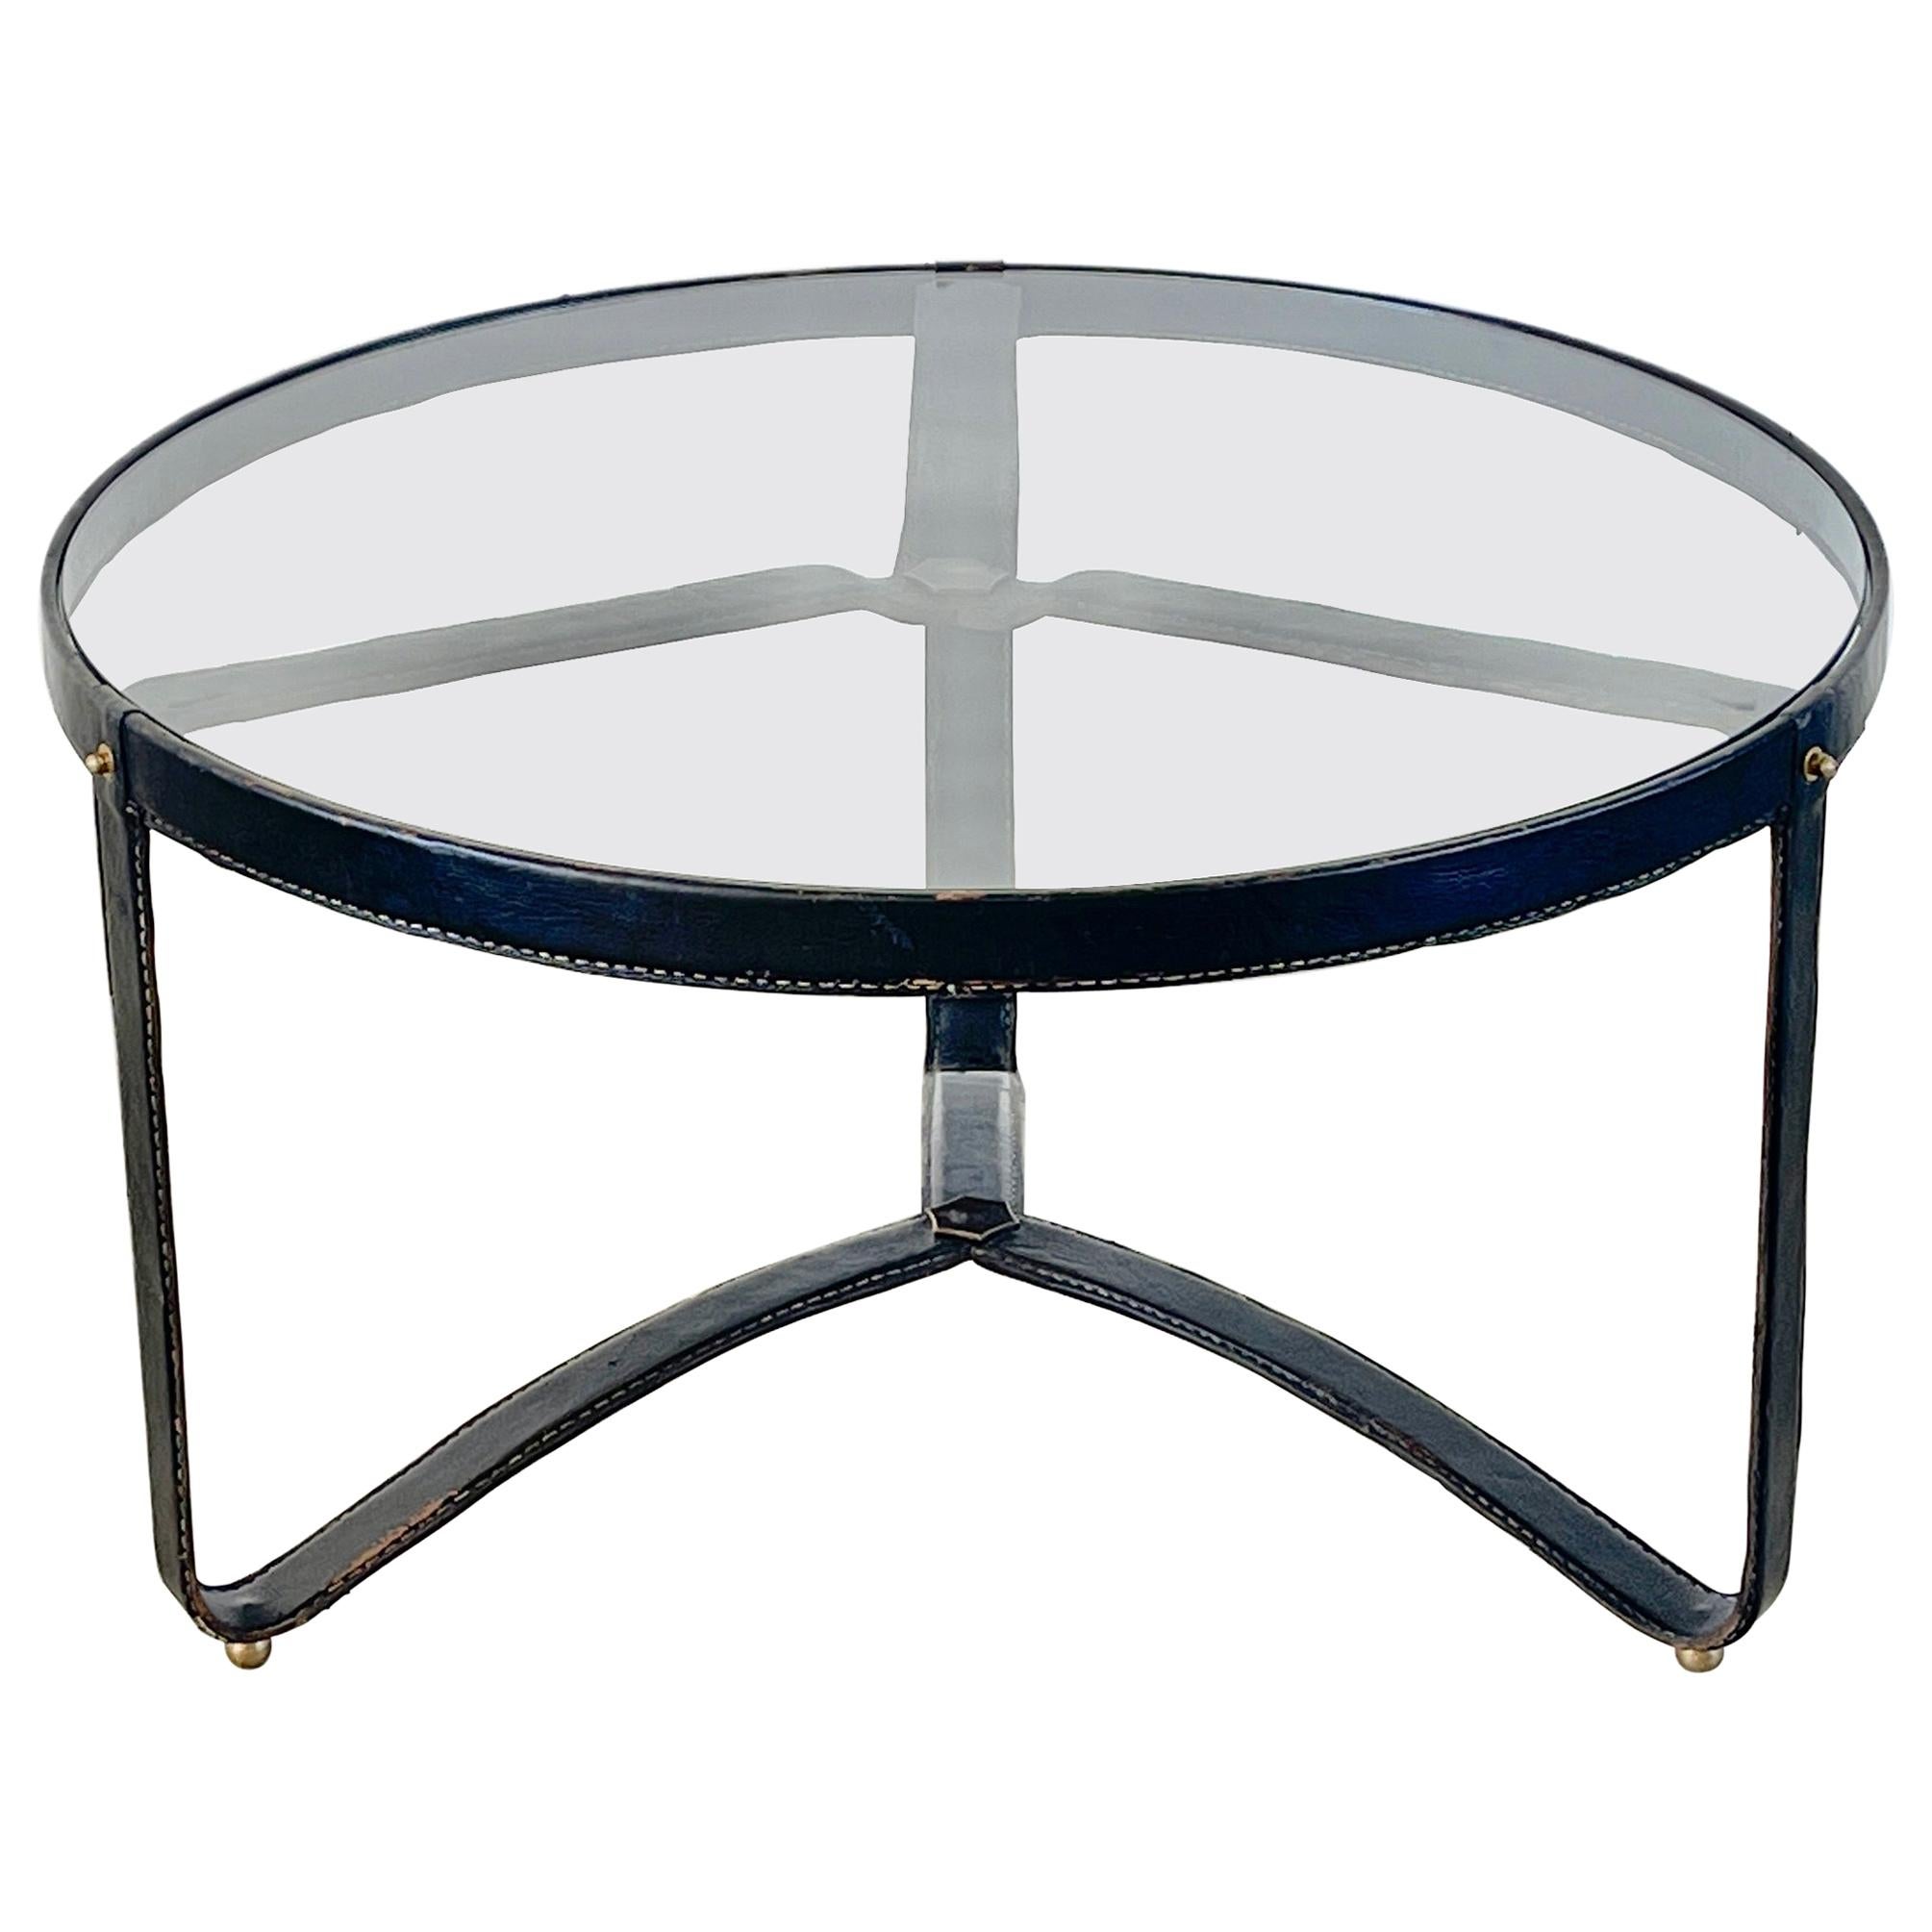 Jacques Adnet Round Coffee Table